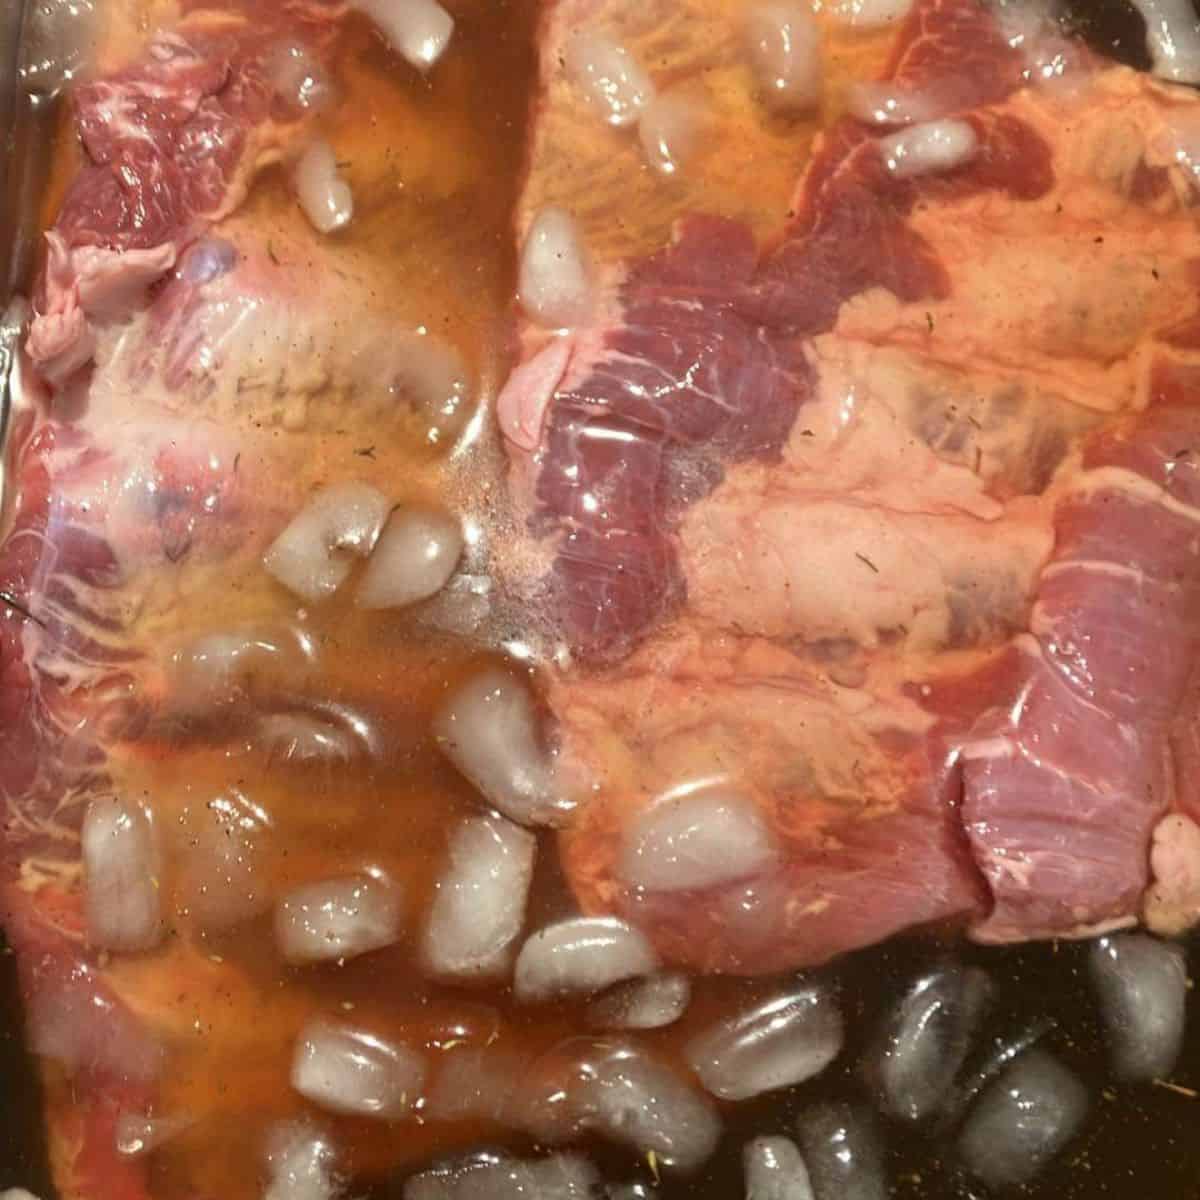 Pork ribs soaking in brine that's been cooled with ice water.